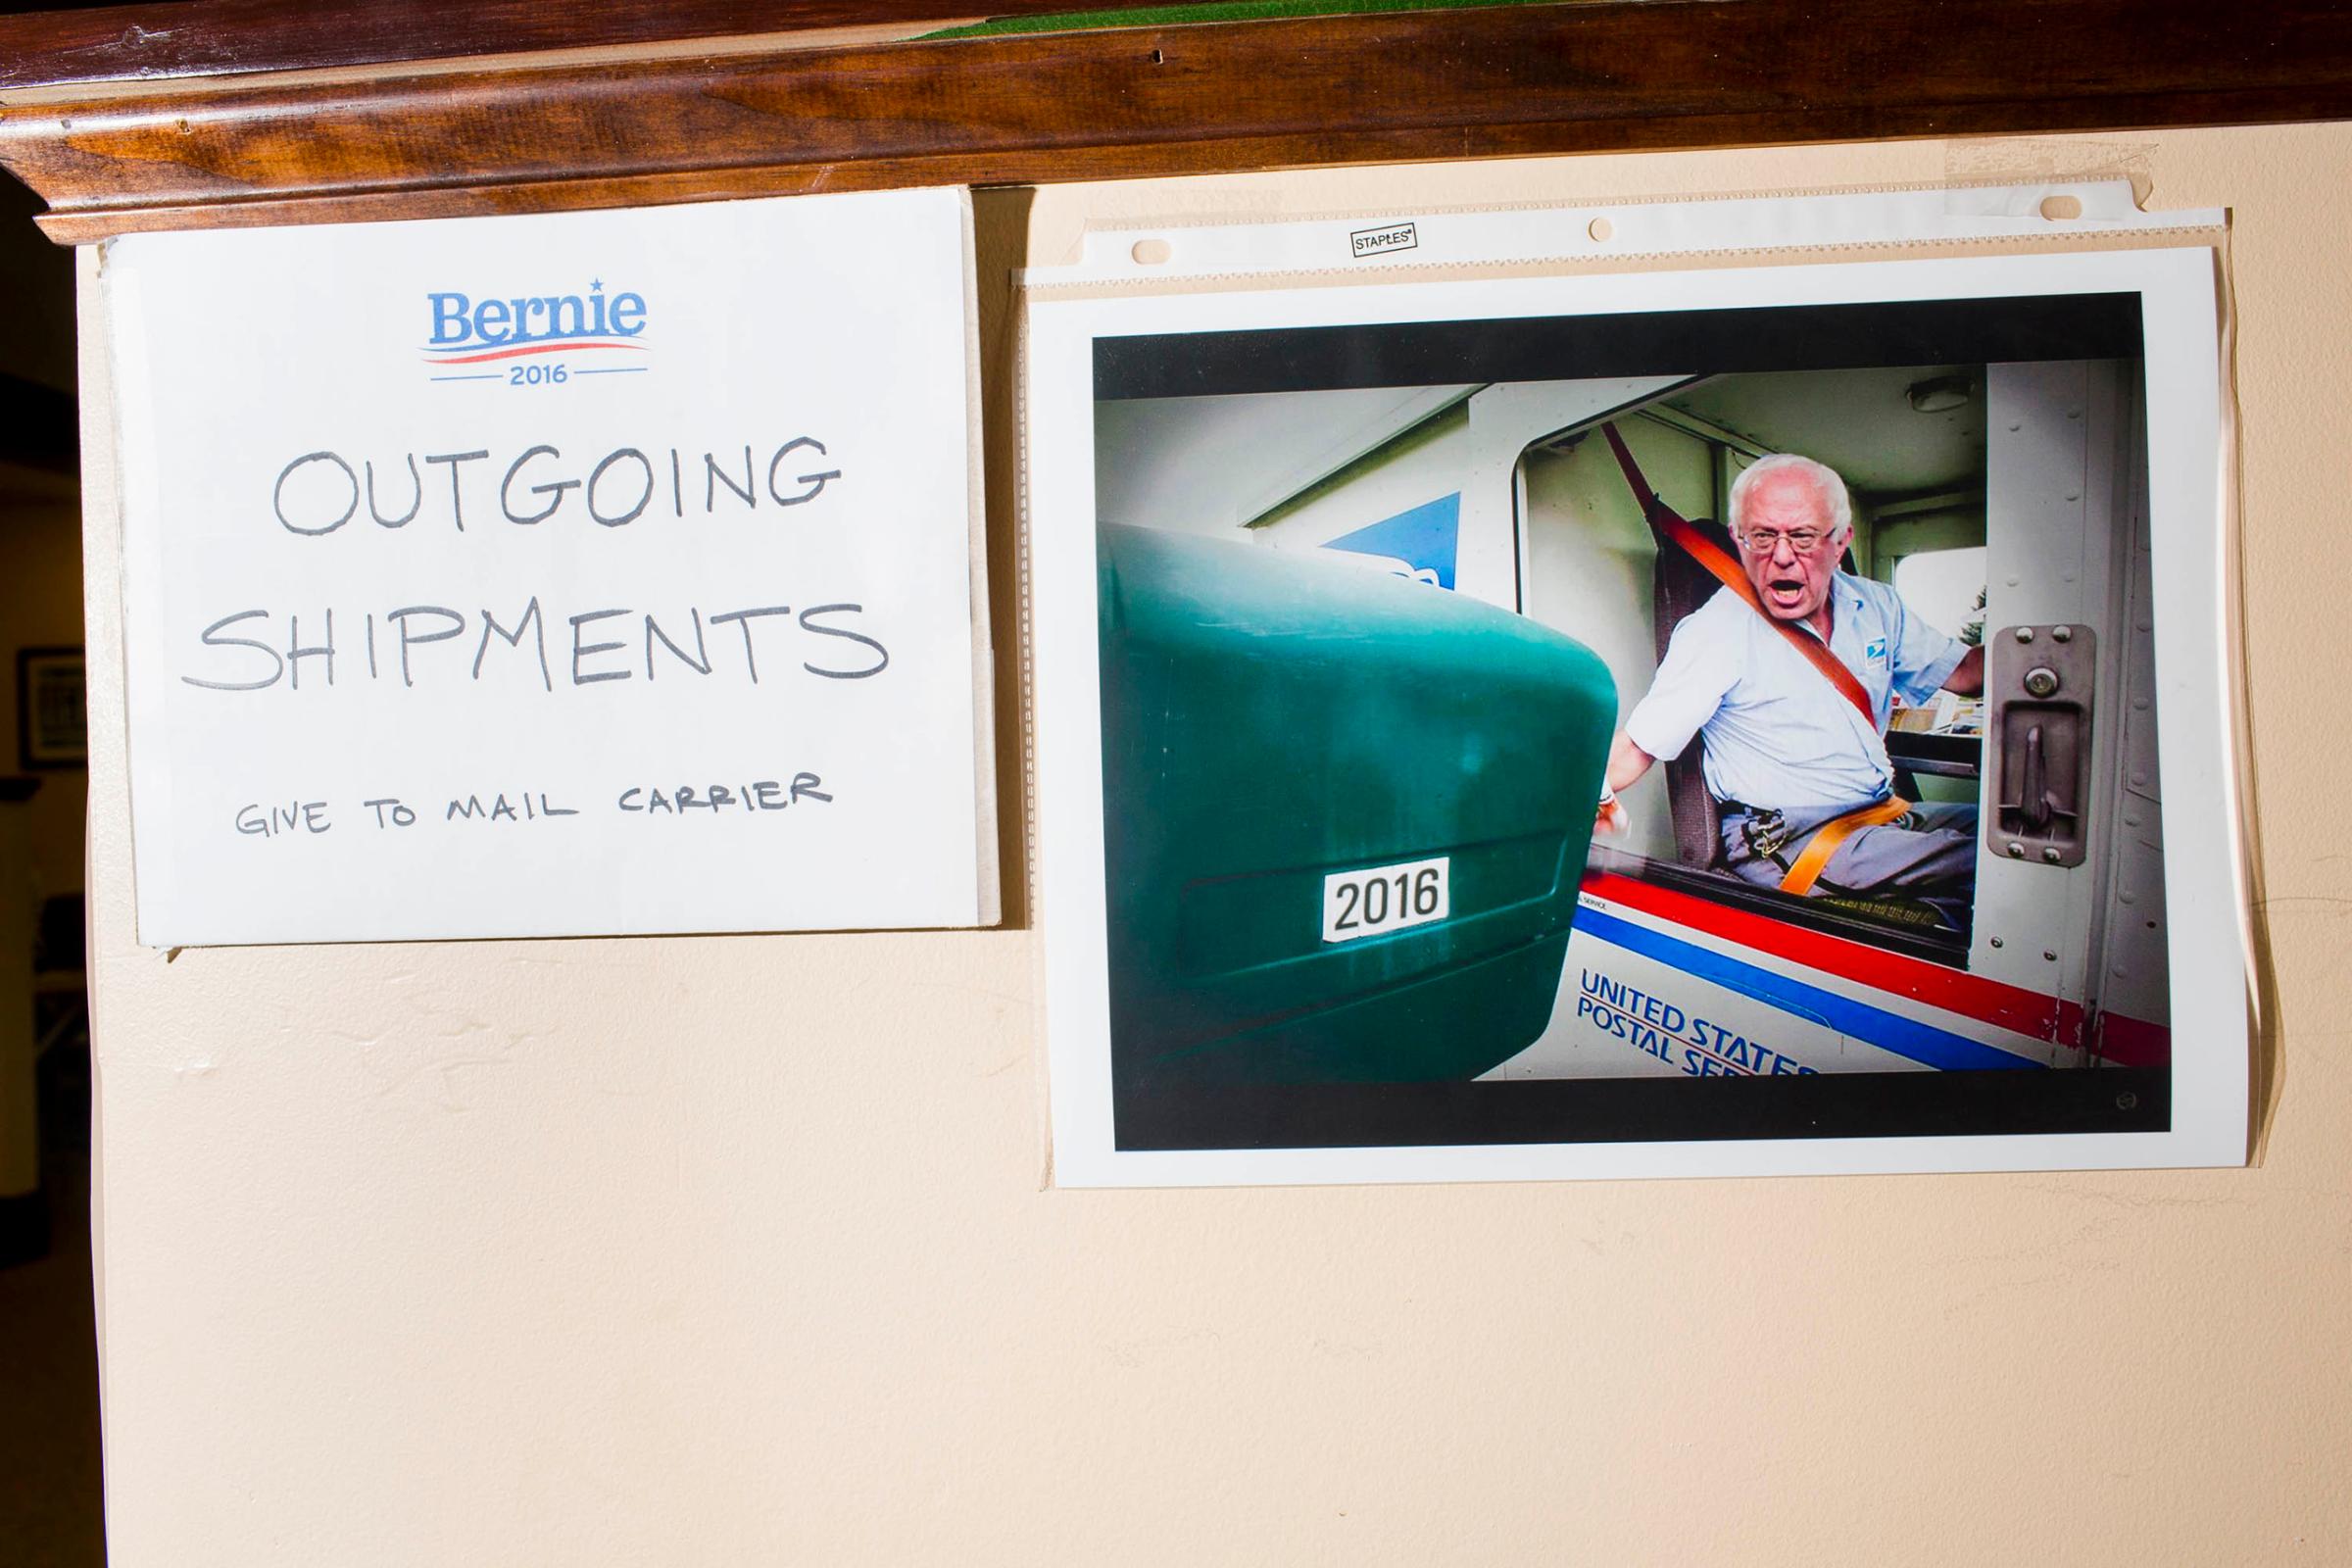 BURLINGTON, VT - MAY 23: Scenes from Inside the campaign headquarters of Bernie Sanders on May 23, 2016, in Burlington, VT. (Photo by Landon Nordeman)